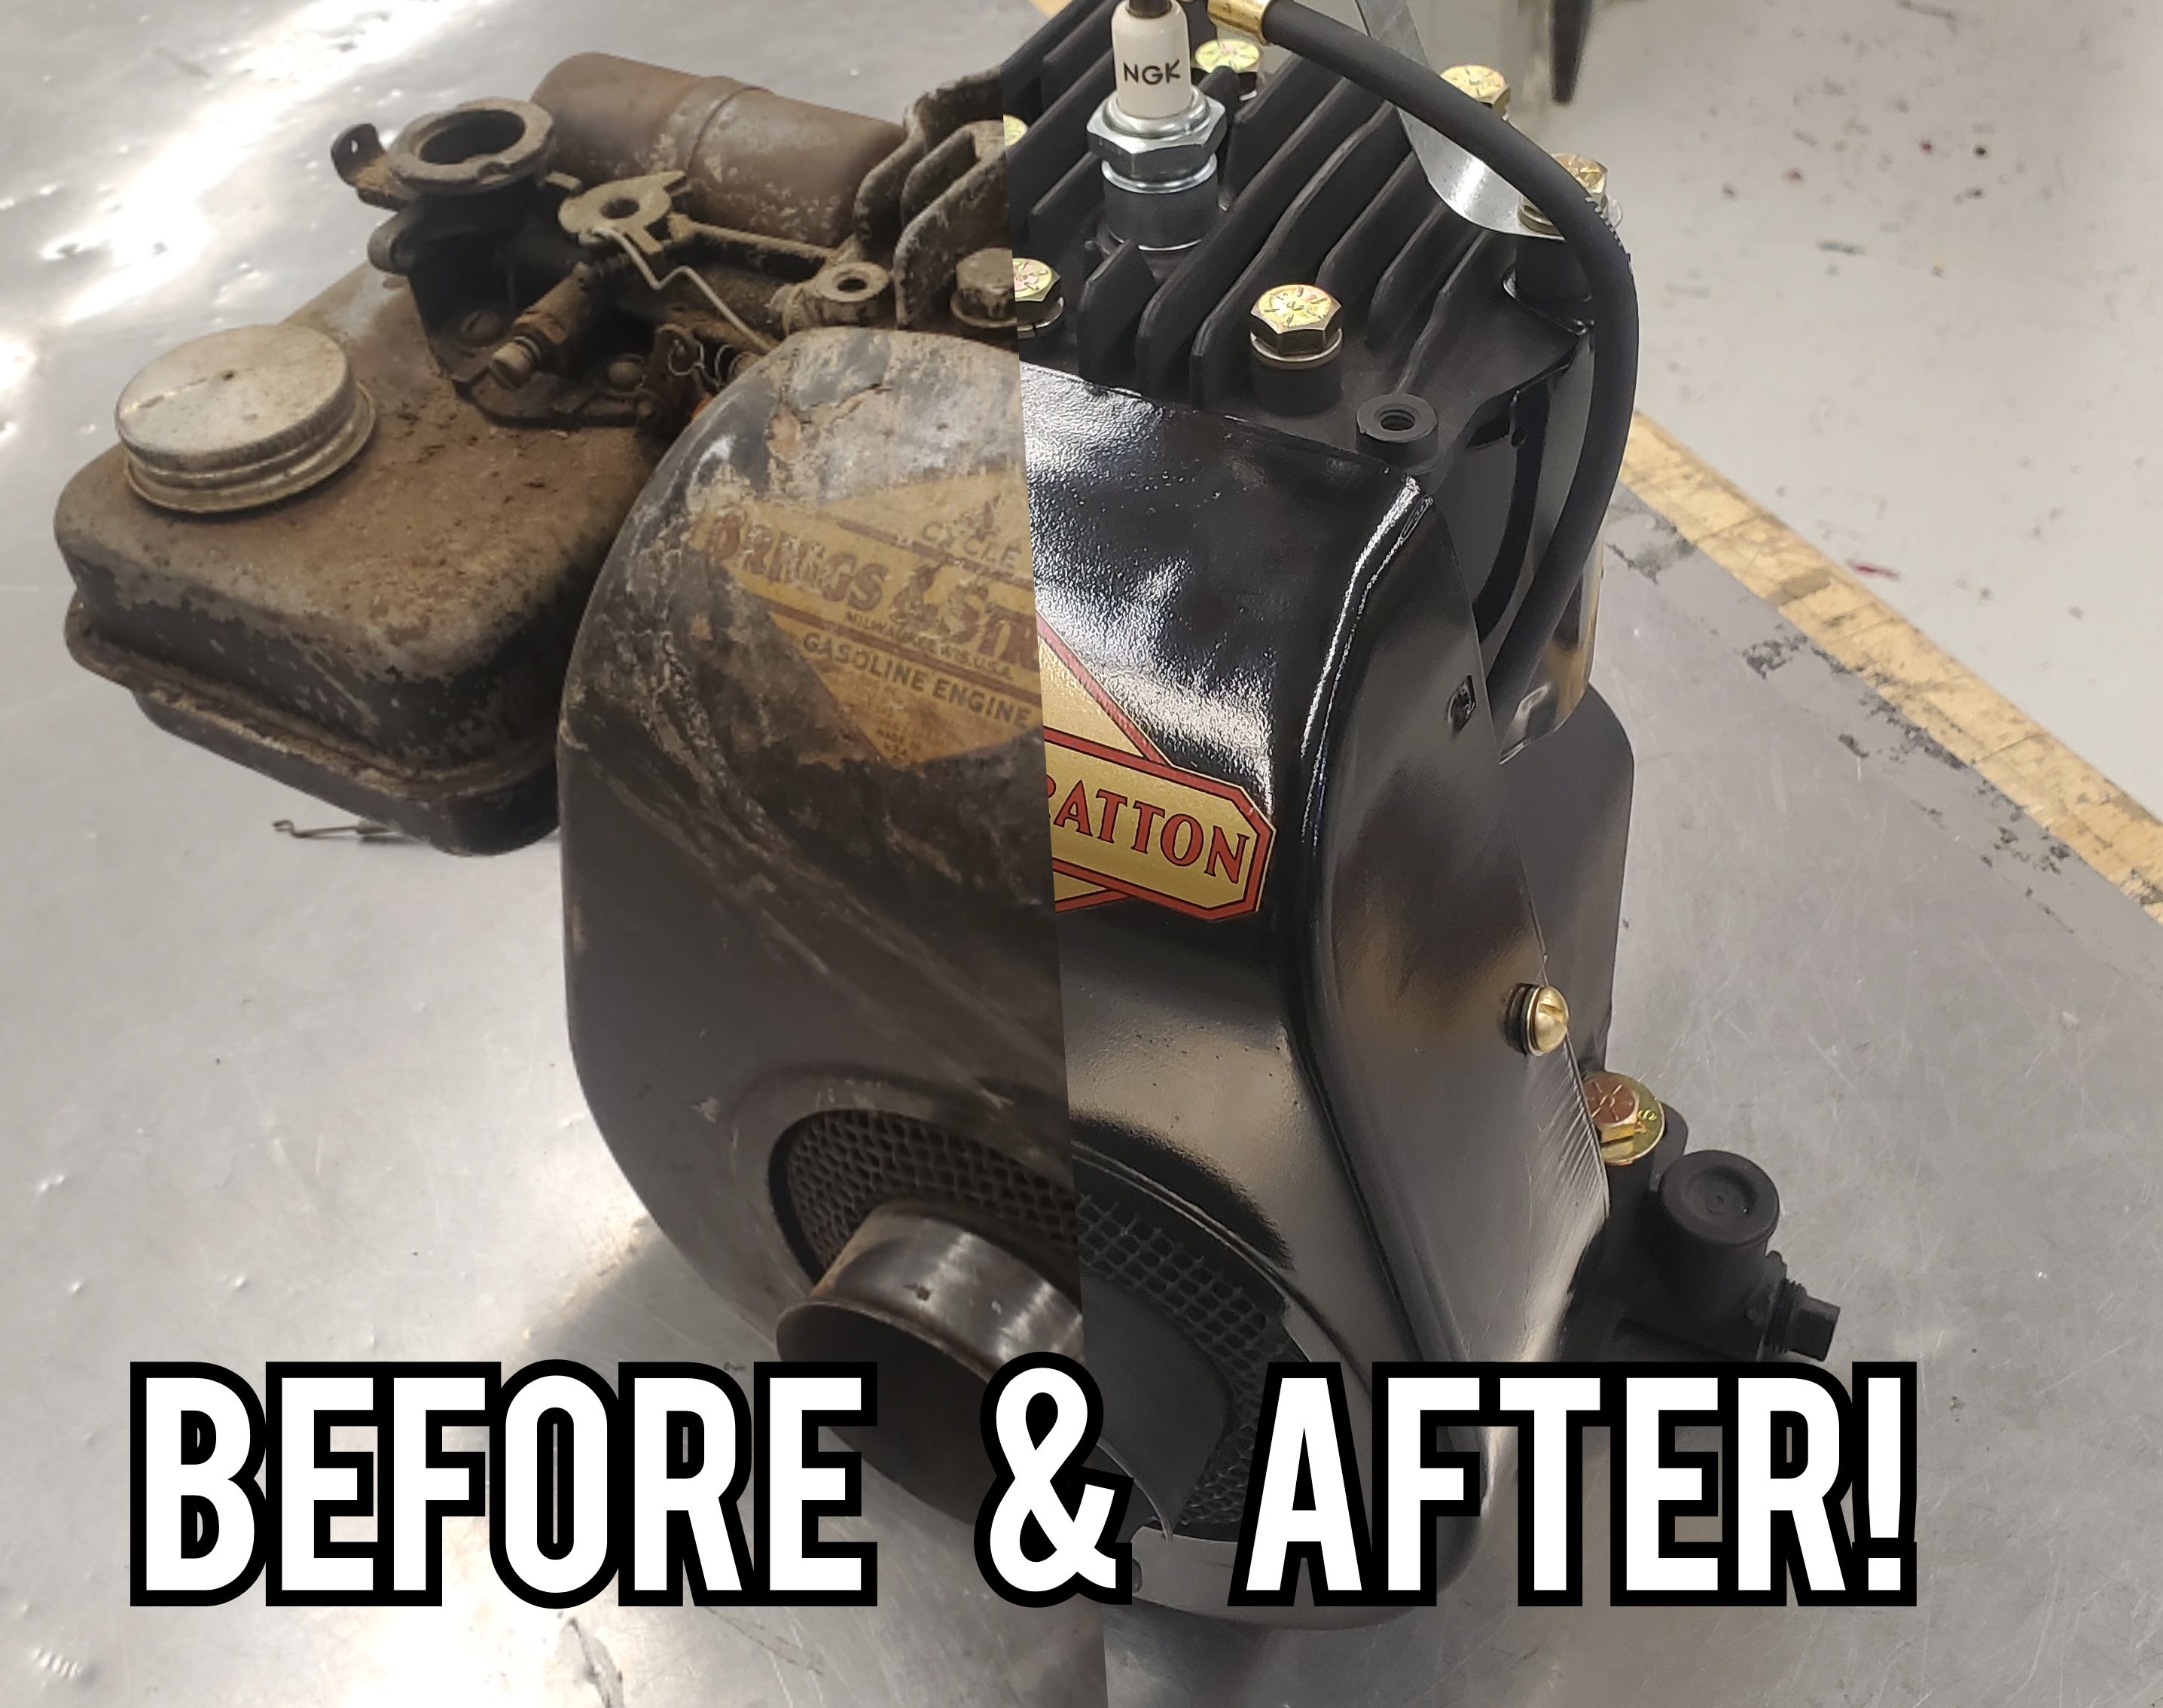 Restoring a 74 Year Old Antique Engine!